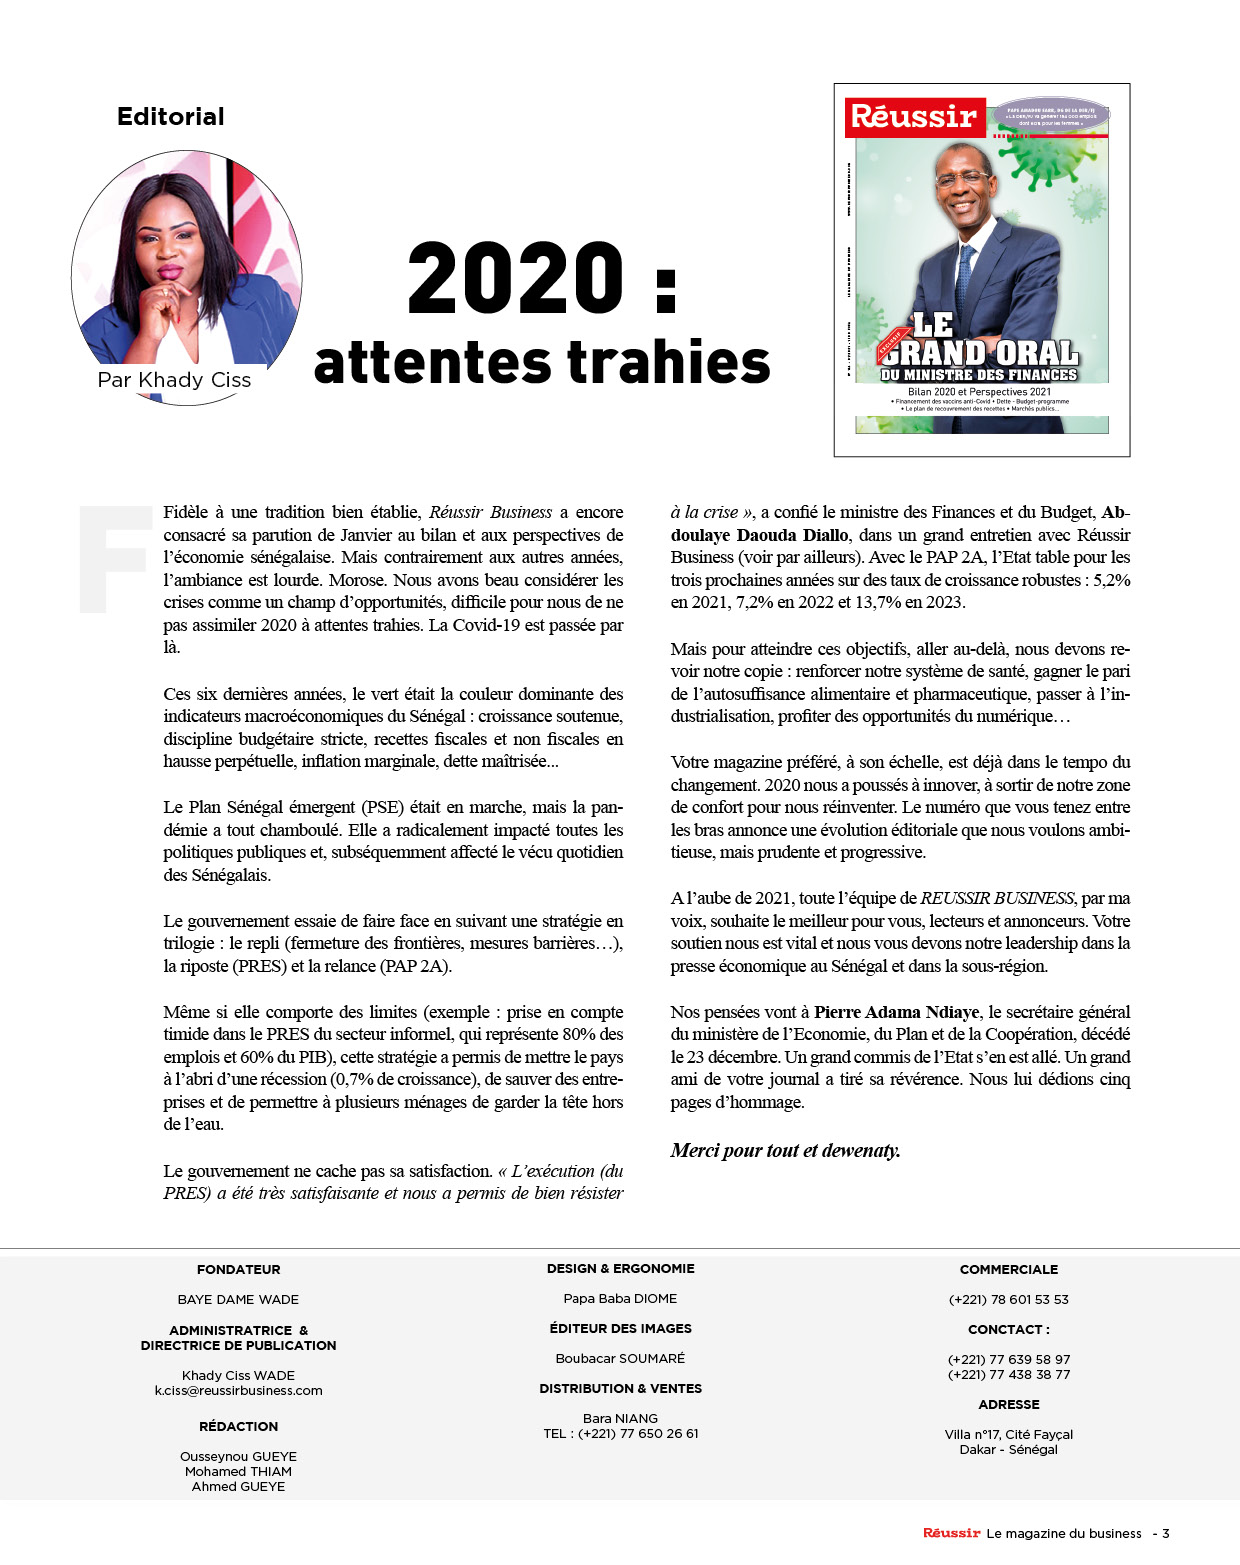 EDITORIAL : 2020, attentes trahies